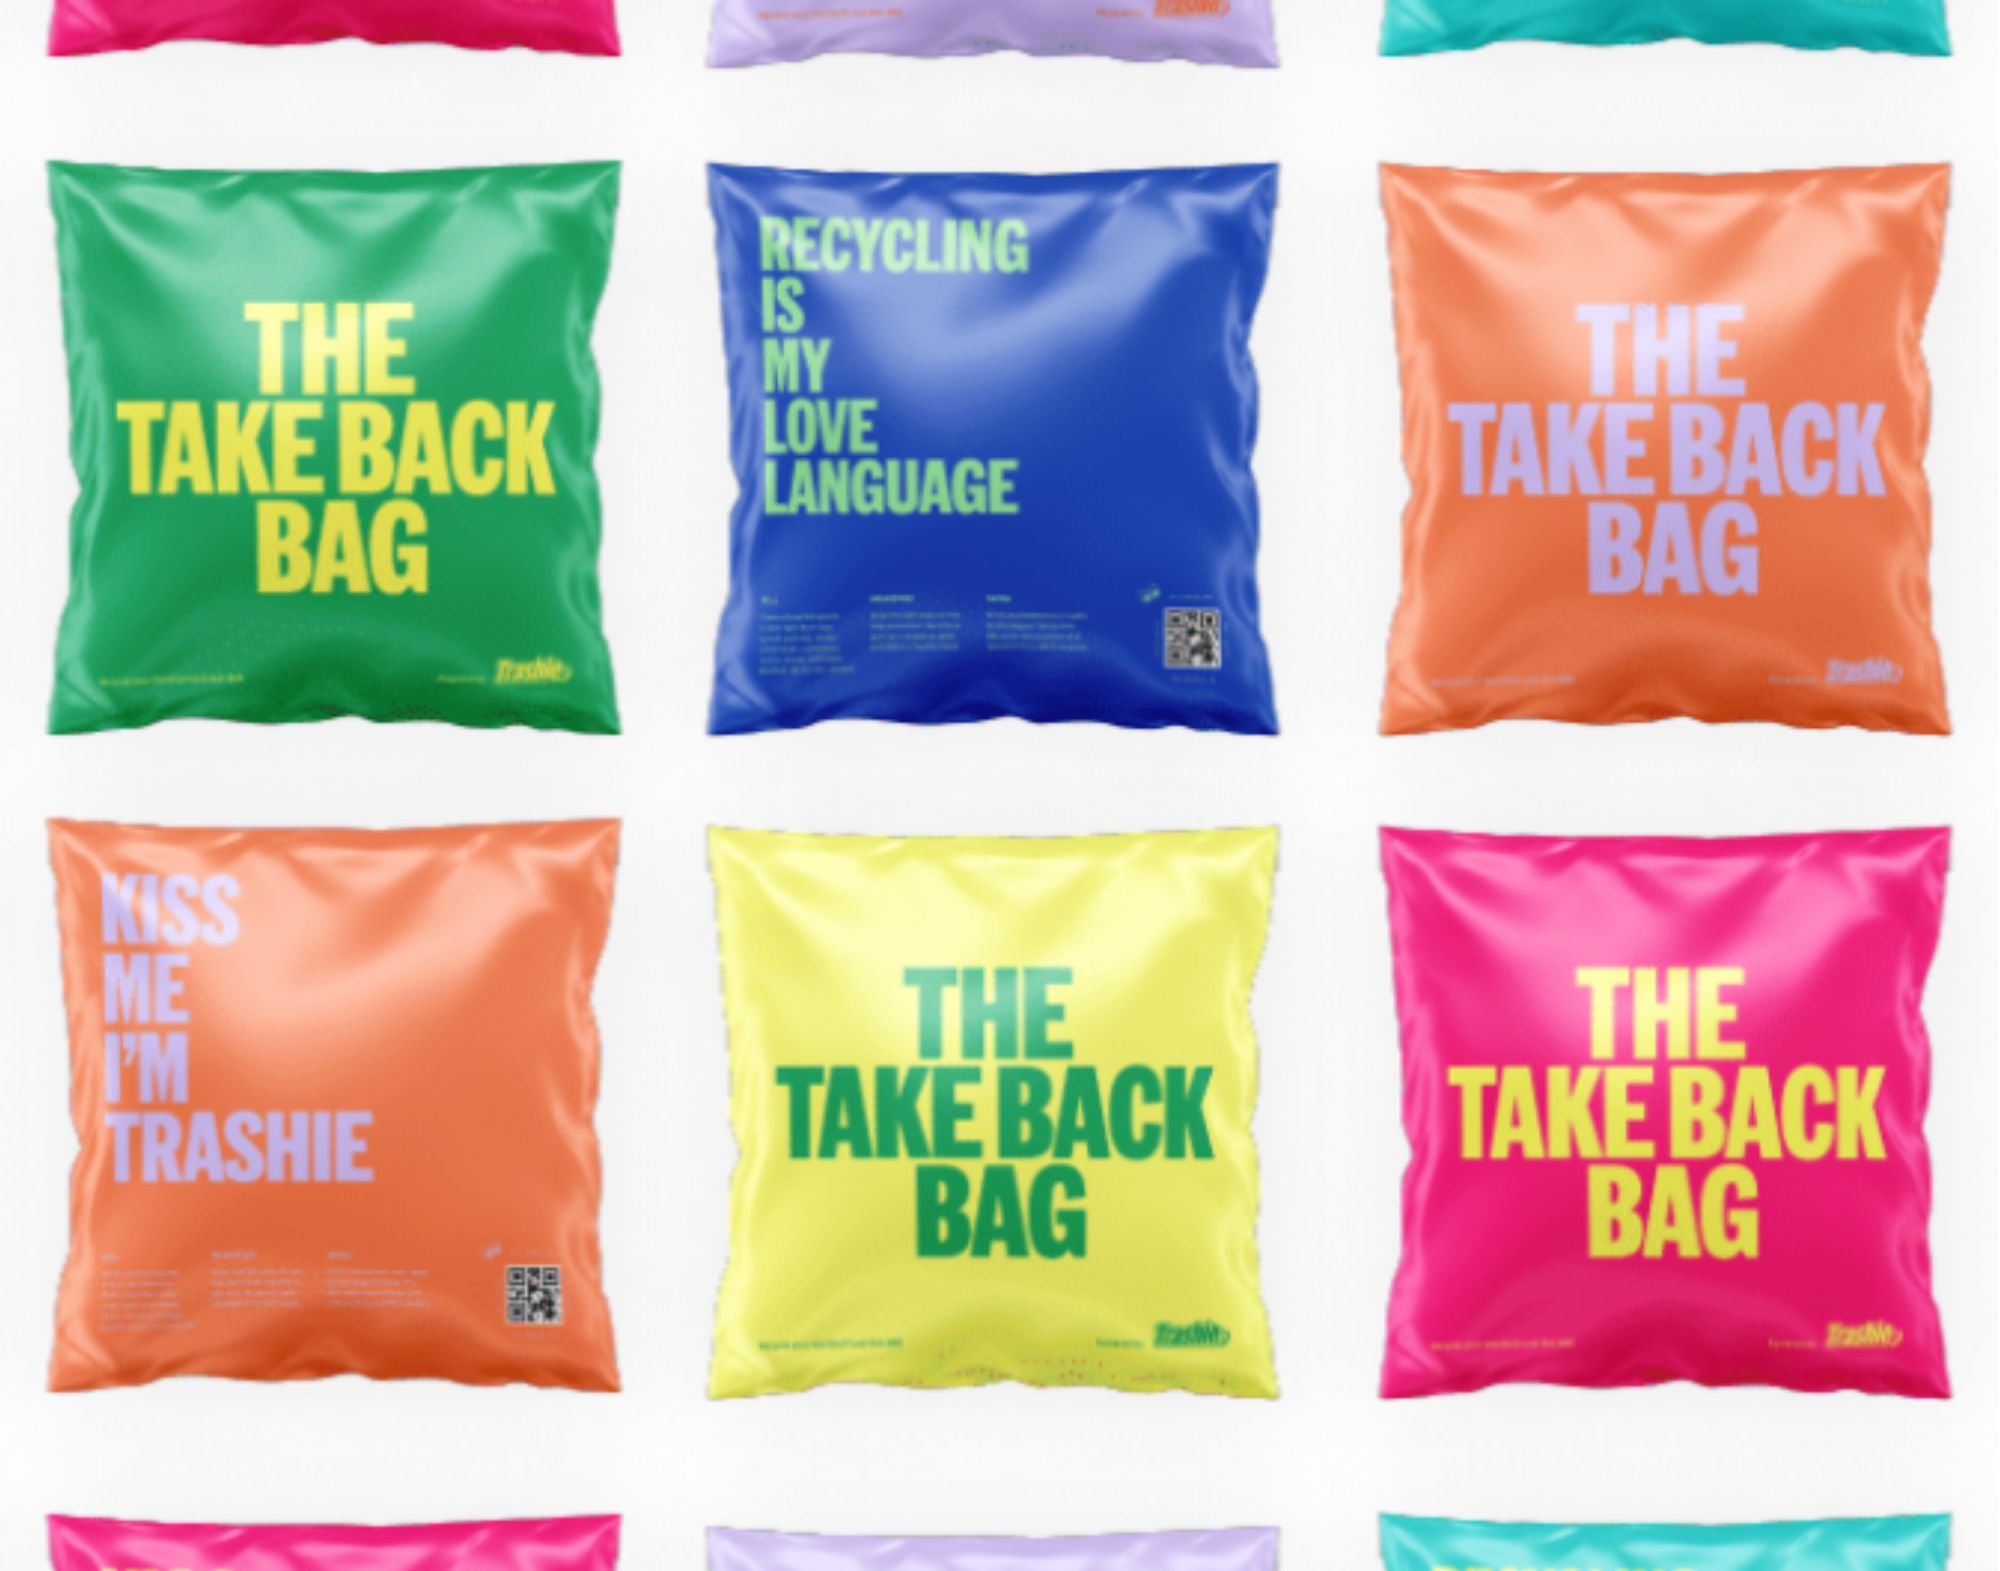 We've teamed up to bring the Take Back Bag powered by Trashie to